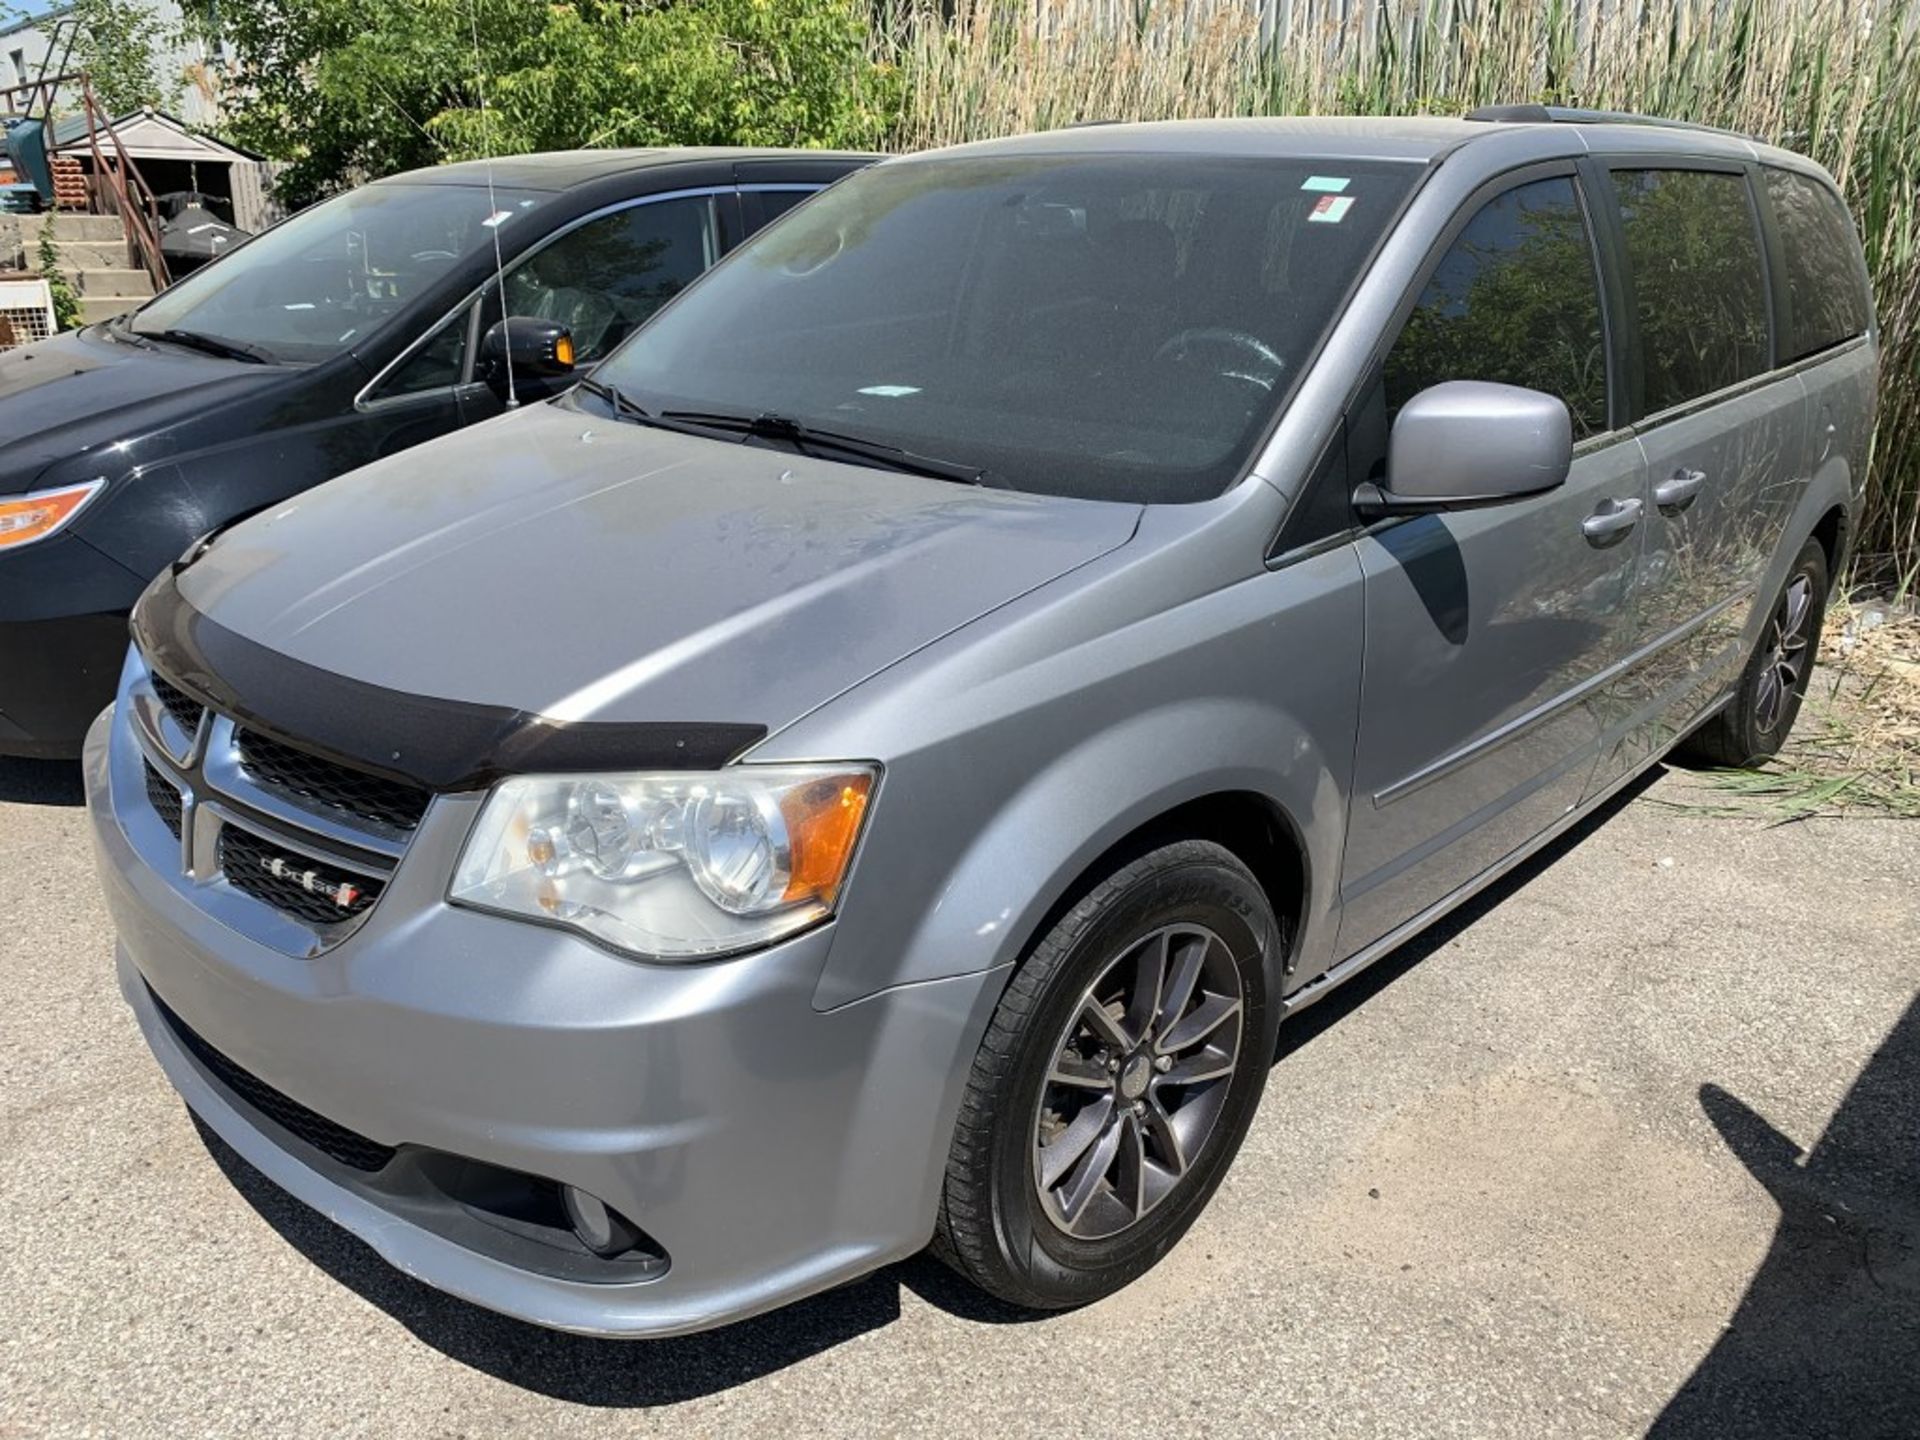 2017 - DODGE CARAVAN SE - 141,042KM - VIN# 2C4RDGBGXHR579918 - ALL VEHICLES ARE SOLD AS IS WHERE